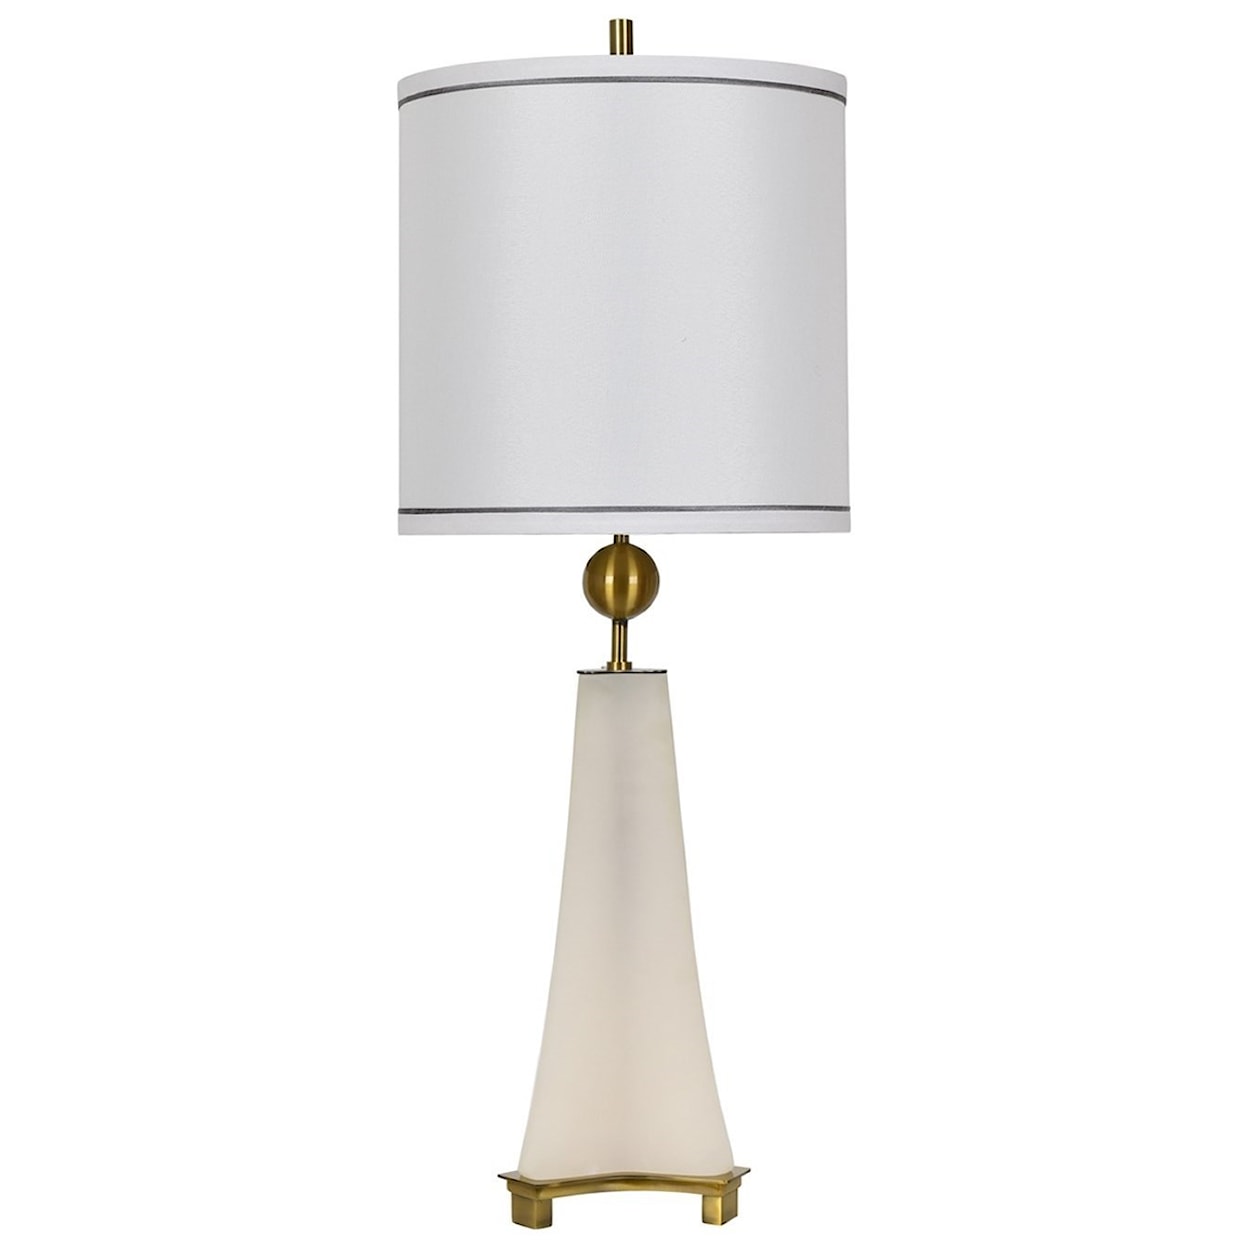 Crestview Collection Lighting Tribeca Table Lamp